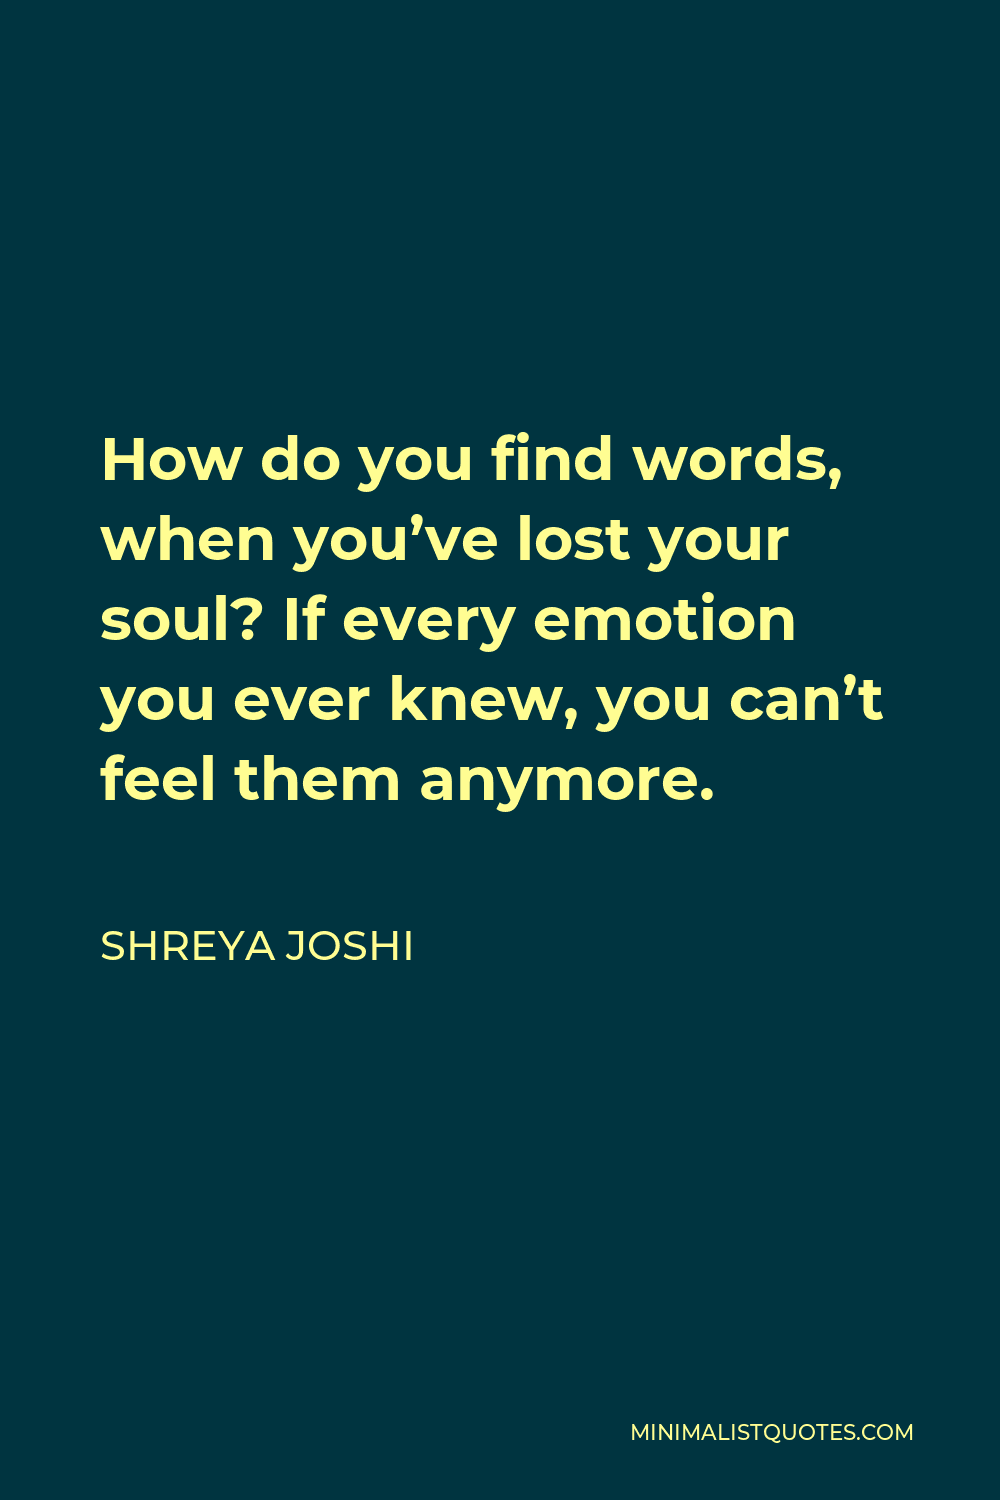 Shreya Joshi Quote - How do you find words, when you’ve lost your soul? If every emotion you ever knew, you can’t feel them anymore.